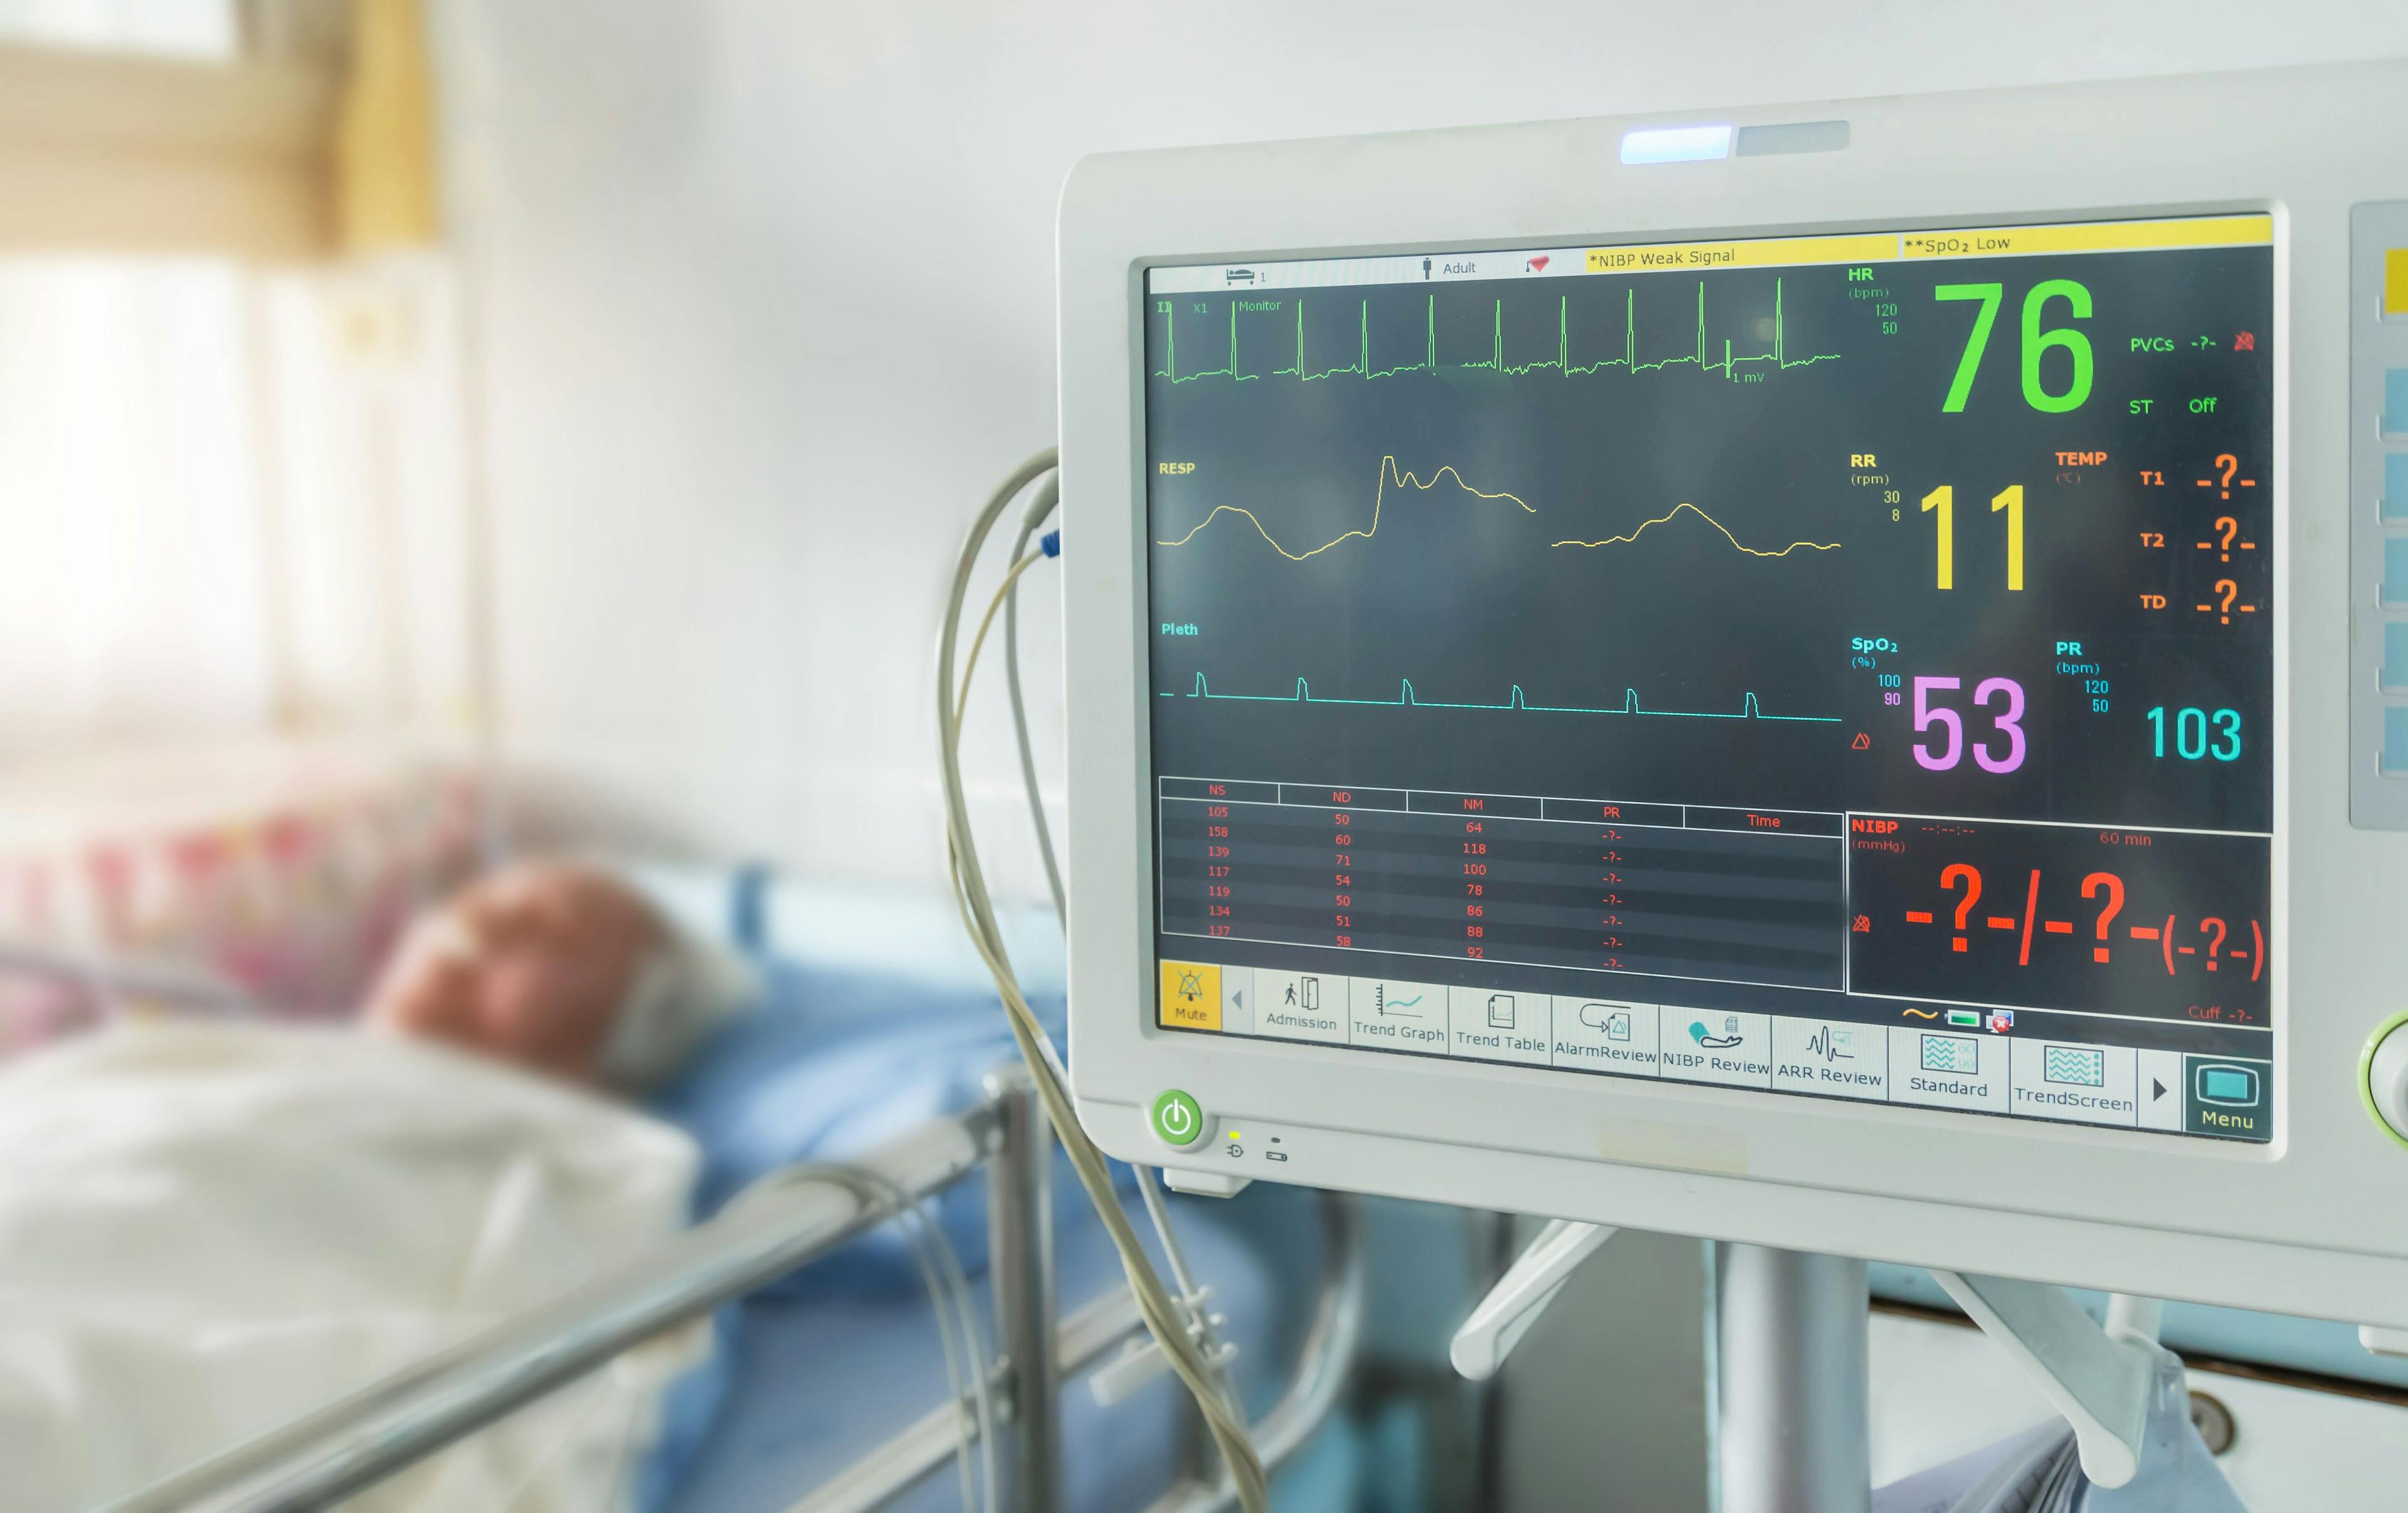 Feds will report patient safety data, but hospitals won’t face penalties